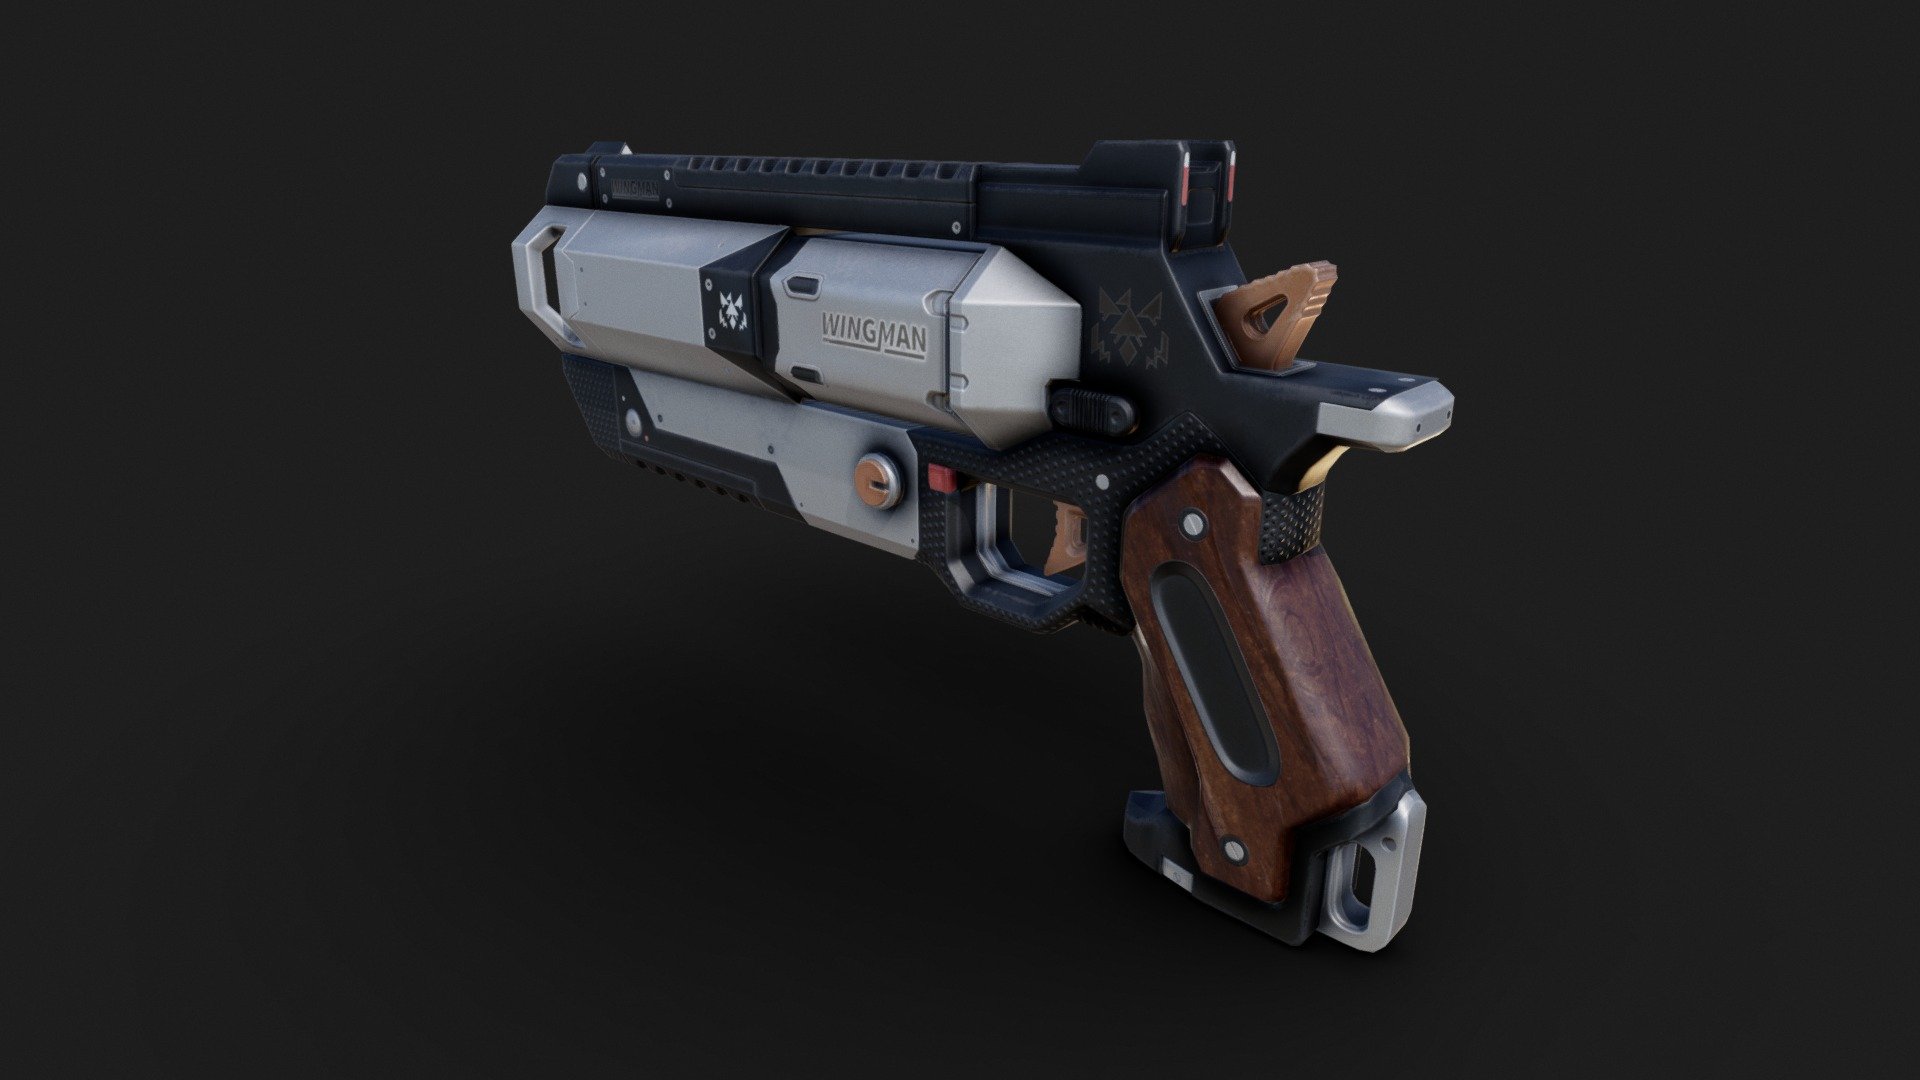 this is my adaptation to this gun from apex legends made in high - low resolution mesh with PBR Metal/Rough texture set 
done 3ds max and substance painter - Wingman Gun ( Apex Legends ) - 3D model by Ahmed Mamdouh (@ahmed14456) 3d model